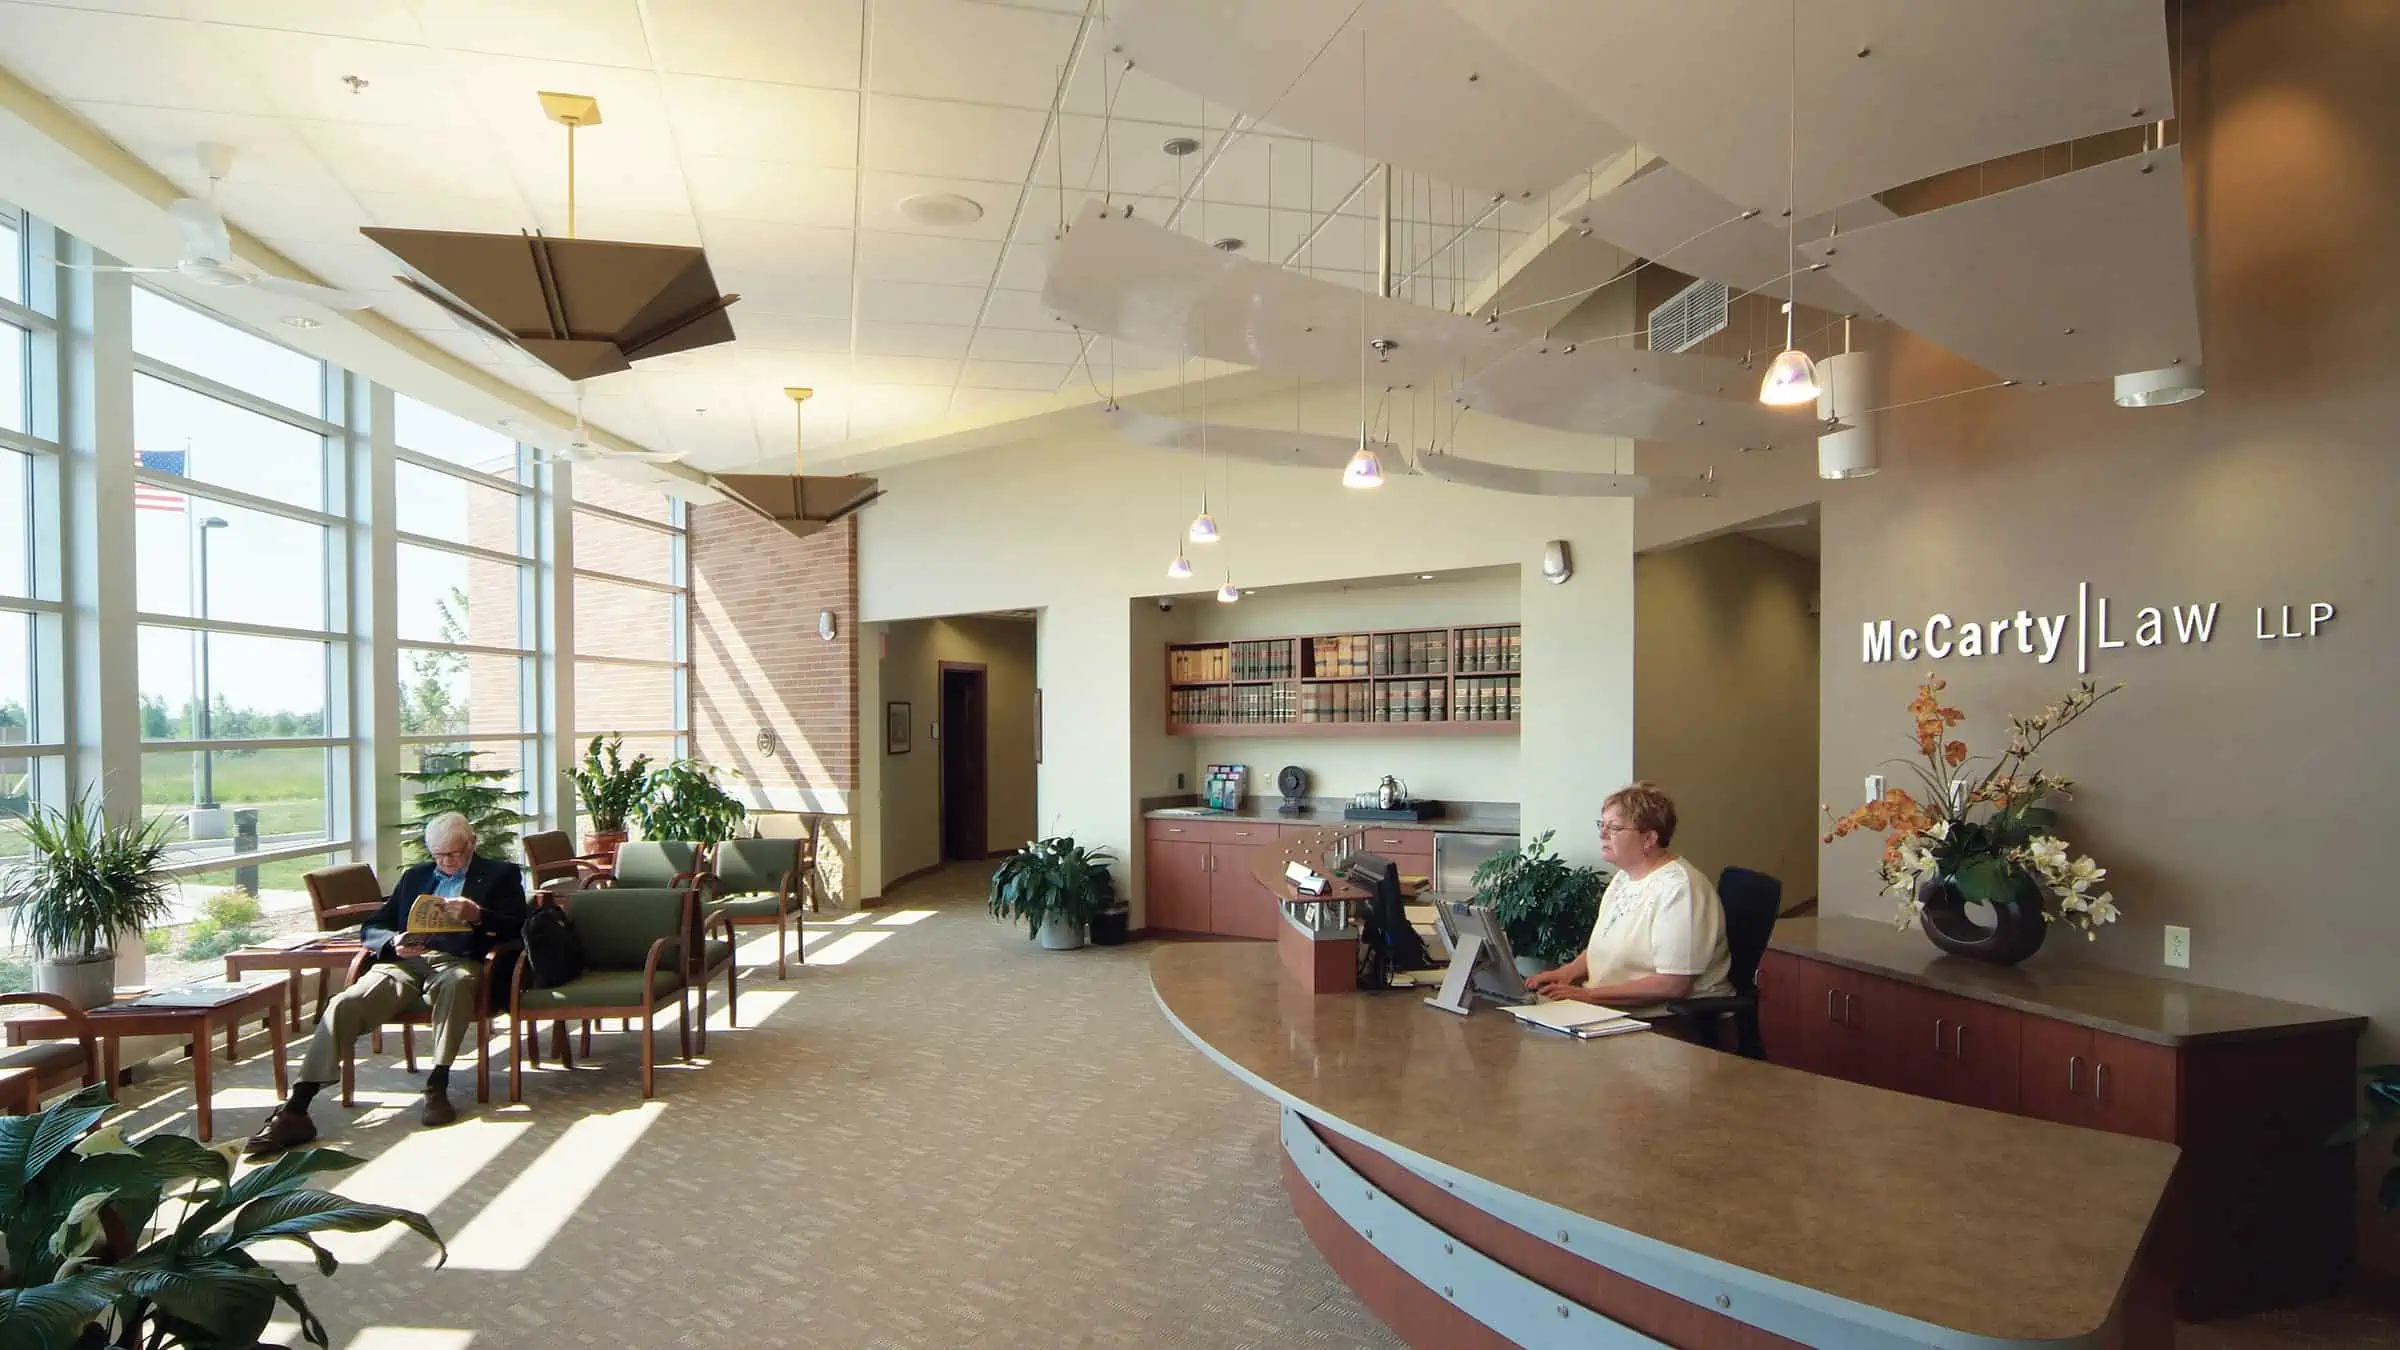 McCarty Law - Office Building Interior Reception Area with Seating